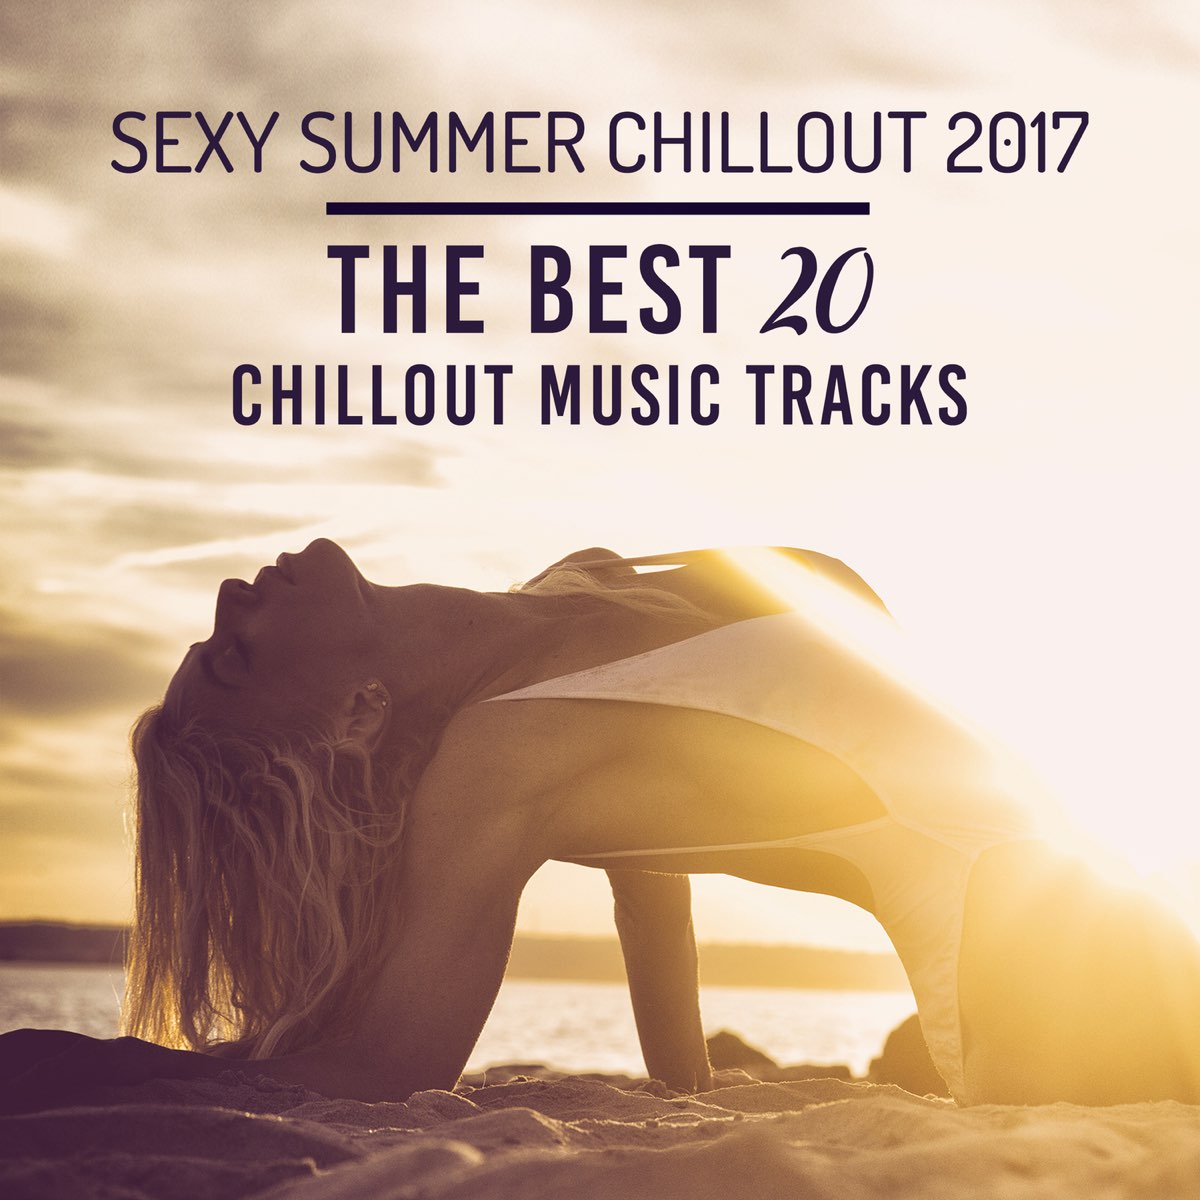 Best chillout music. Летний Chillout. The best DJ Chillout. Chillout перевод. Картинки the best of Chillout Music.